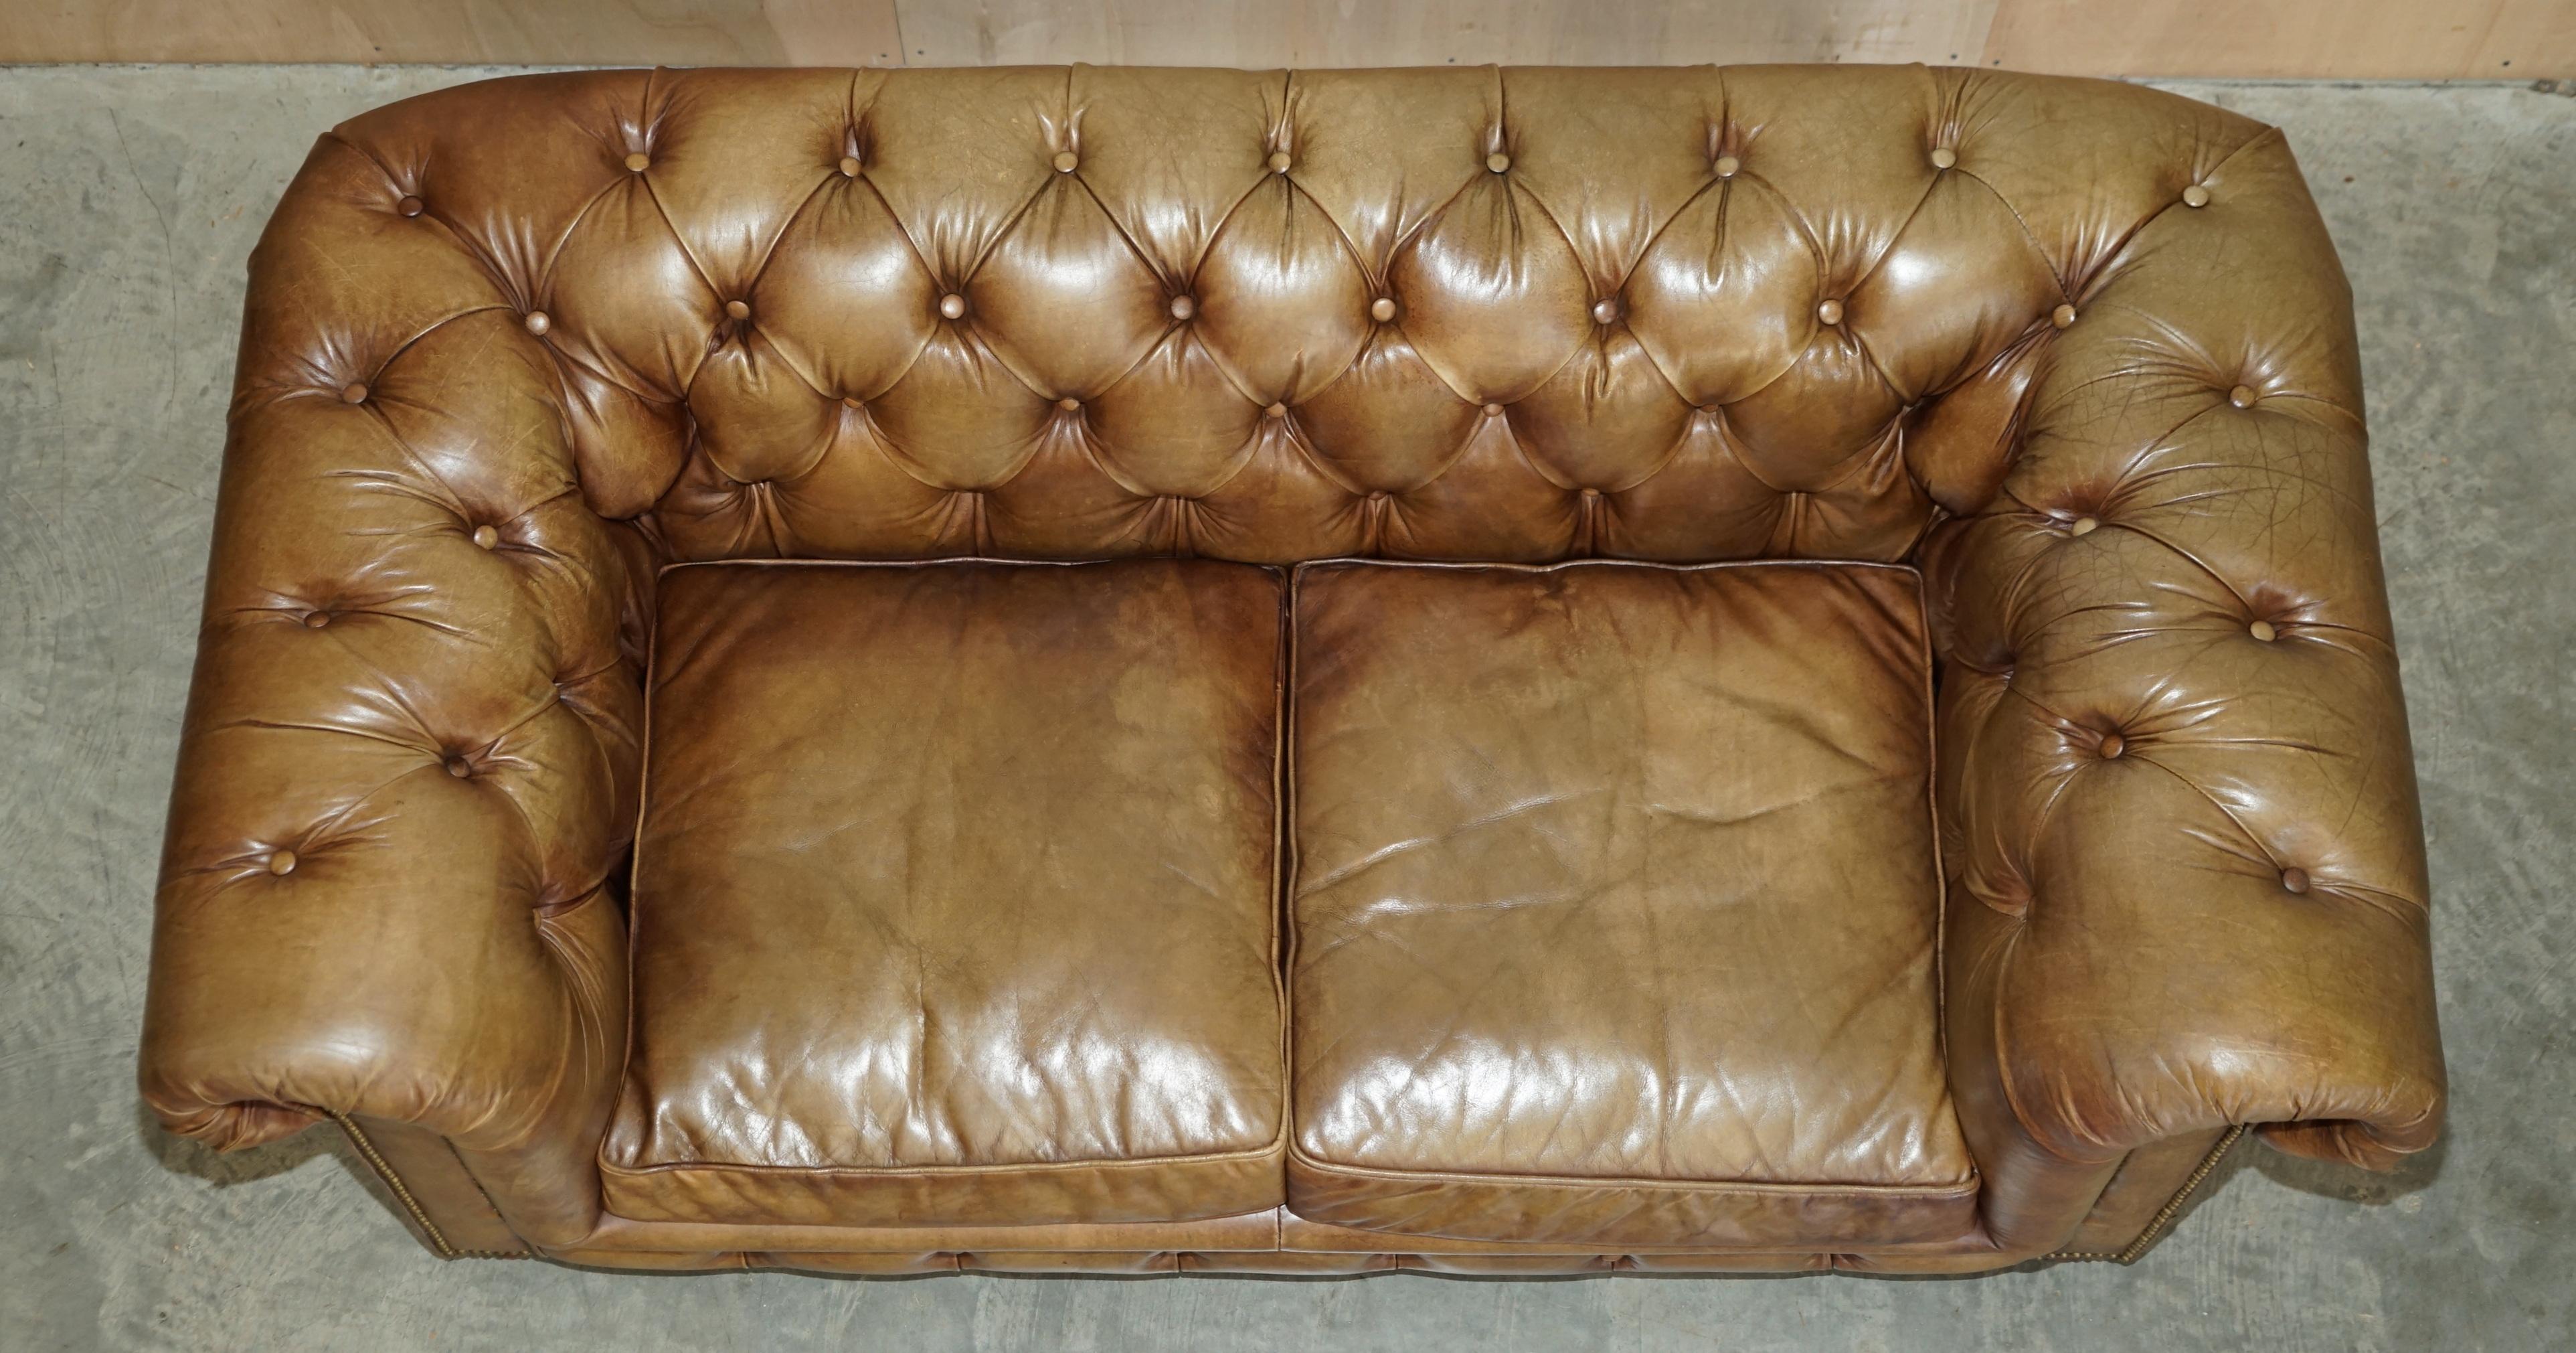 STUNNING TIMOTHY OULTON HALO WESTMiNSTER BROWN LEATHER CHESTERFIELD TUFTED SOFA 3